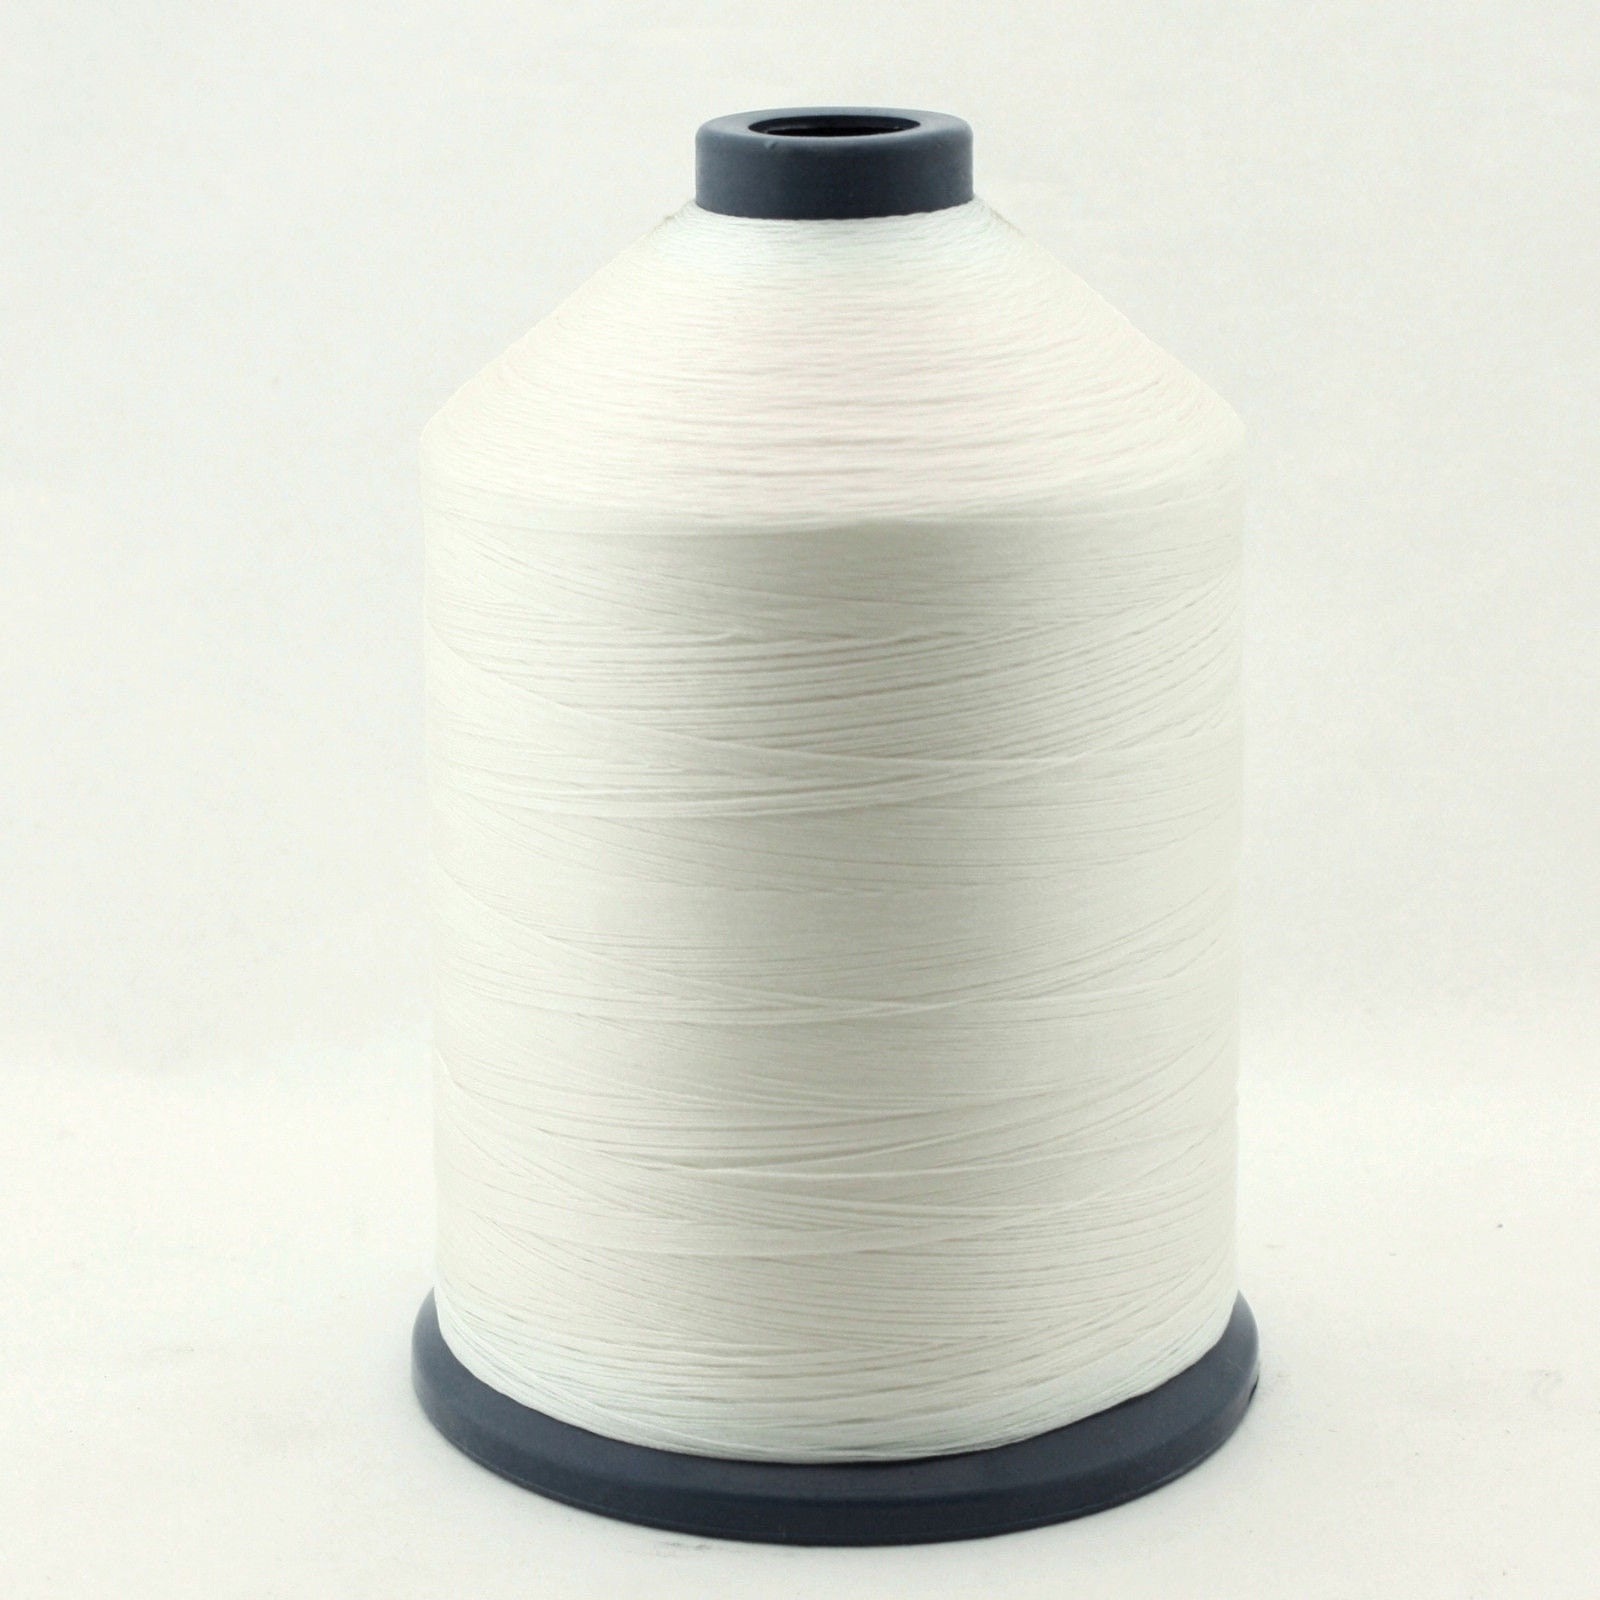 Assorted Size 69 Nylon Thread Package, 4 oz. Spools